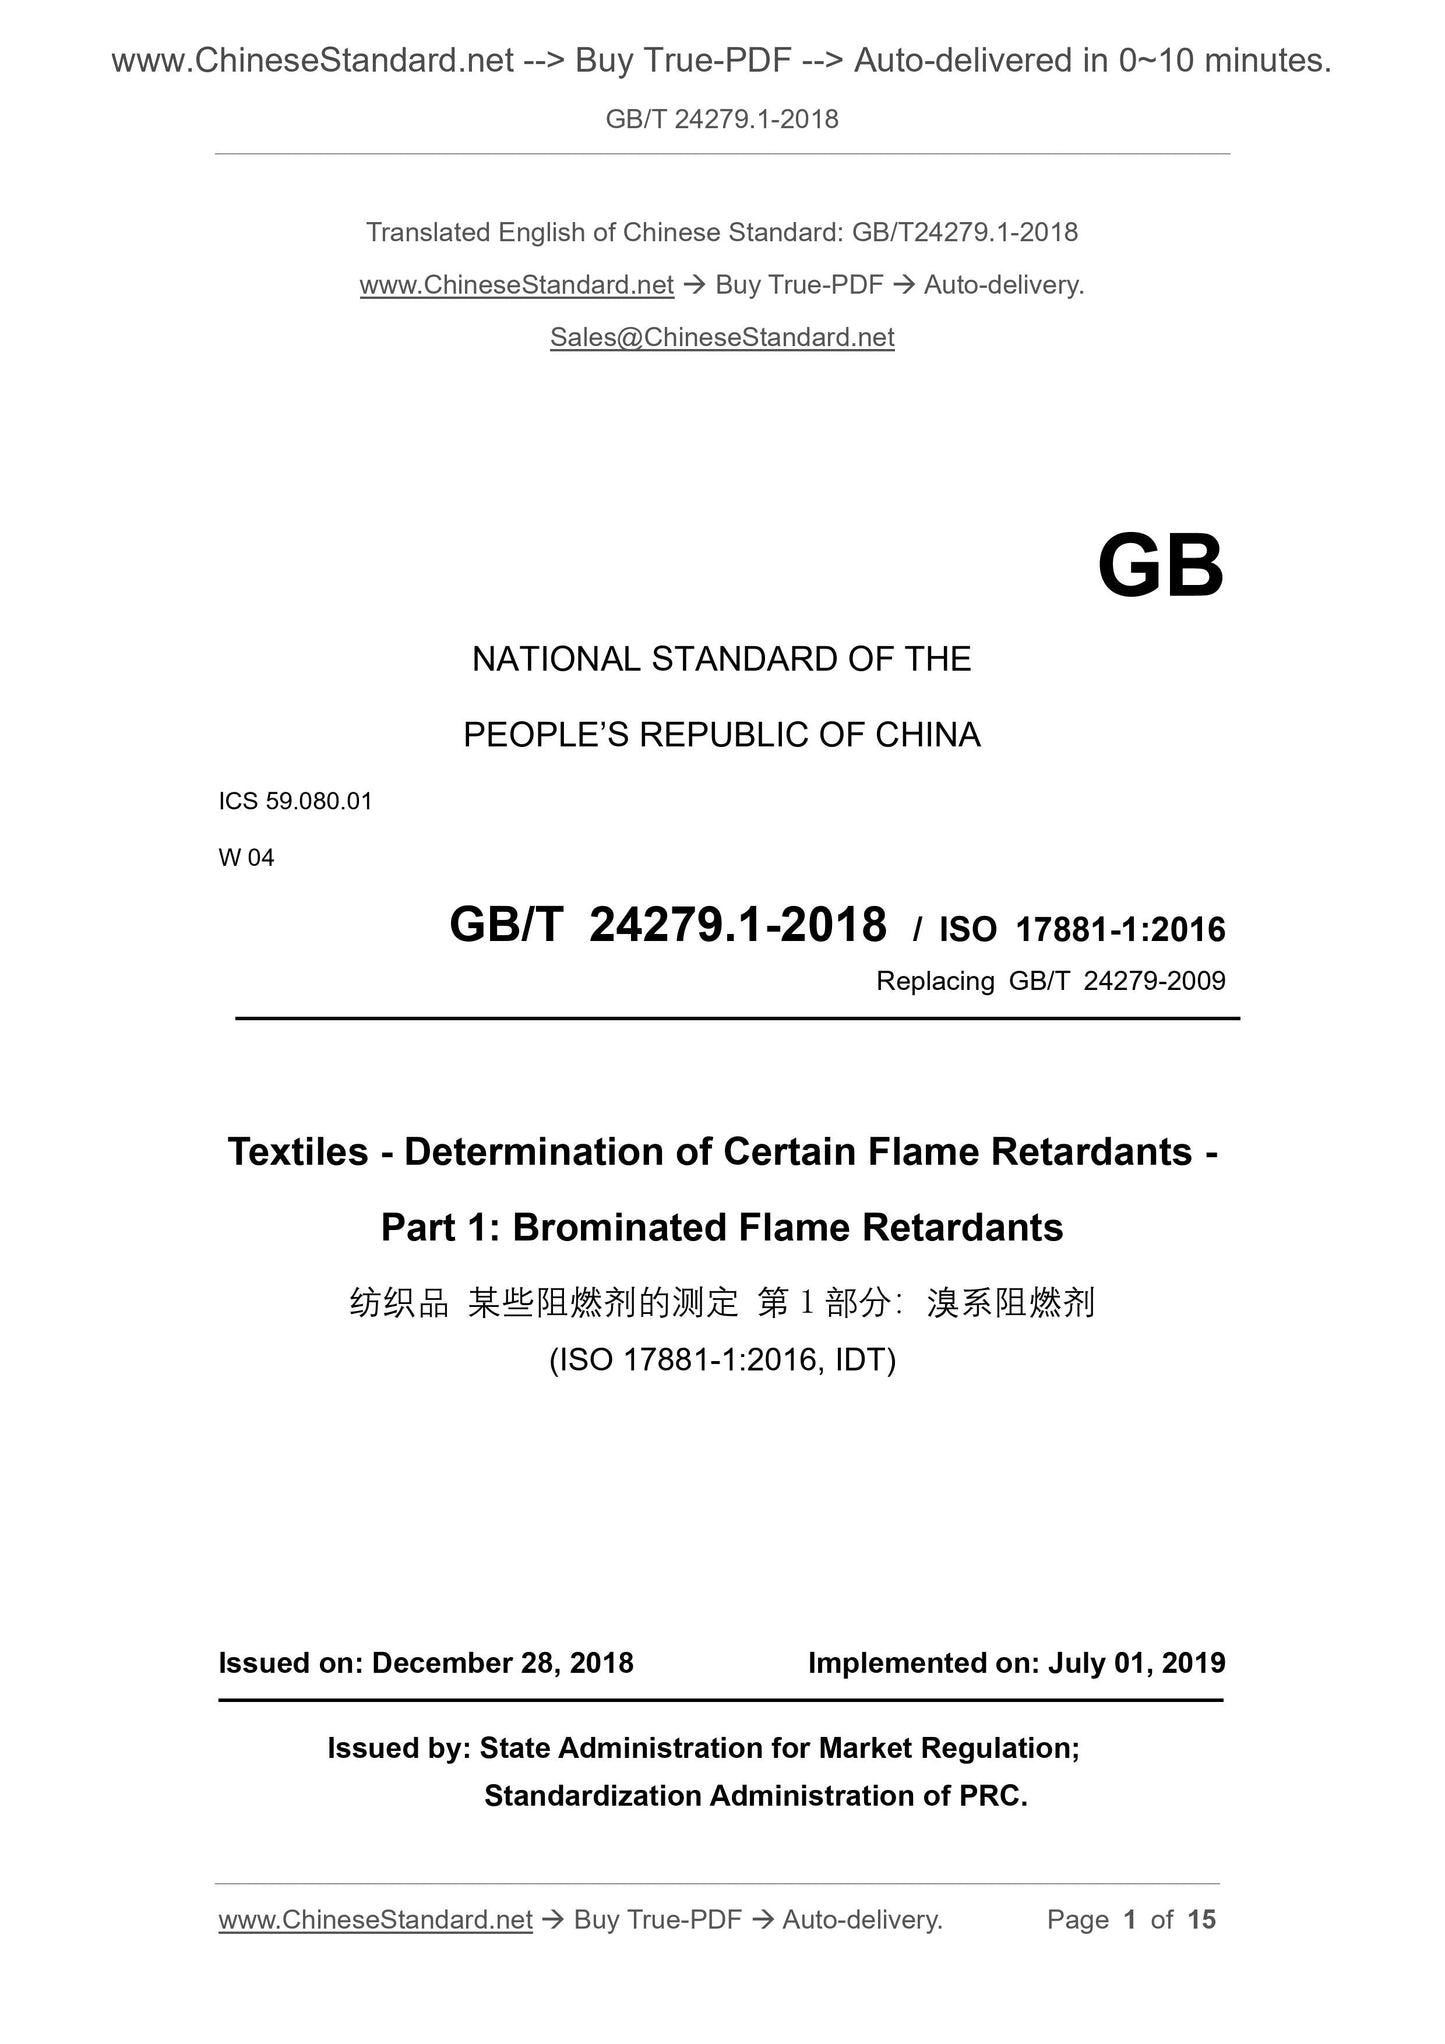 GB/T 24279.1-2018 Page 1